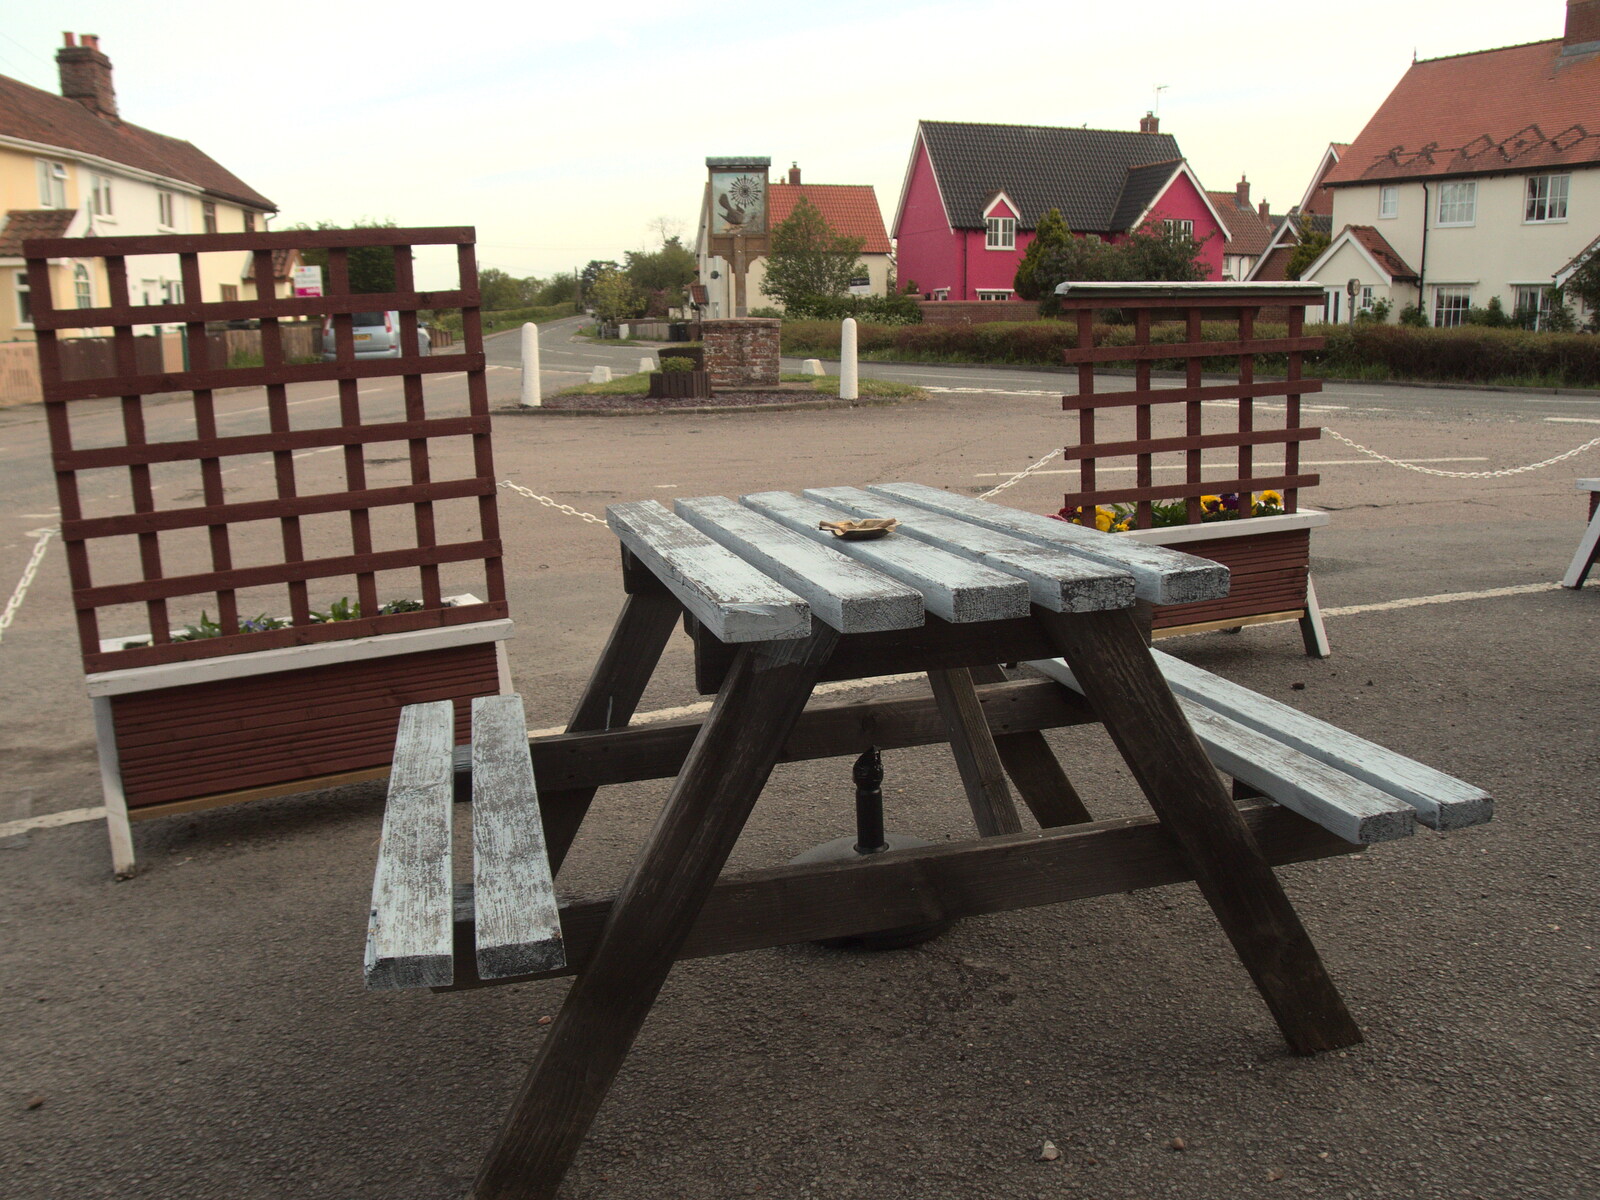 An empty bench outside the Cherry Tree from The BSCC at the King's Head, Brockdish, Norfolk - 13th May 2021